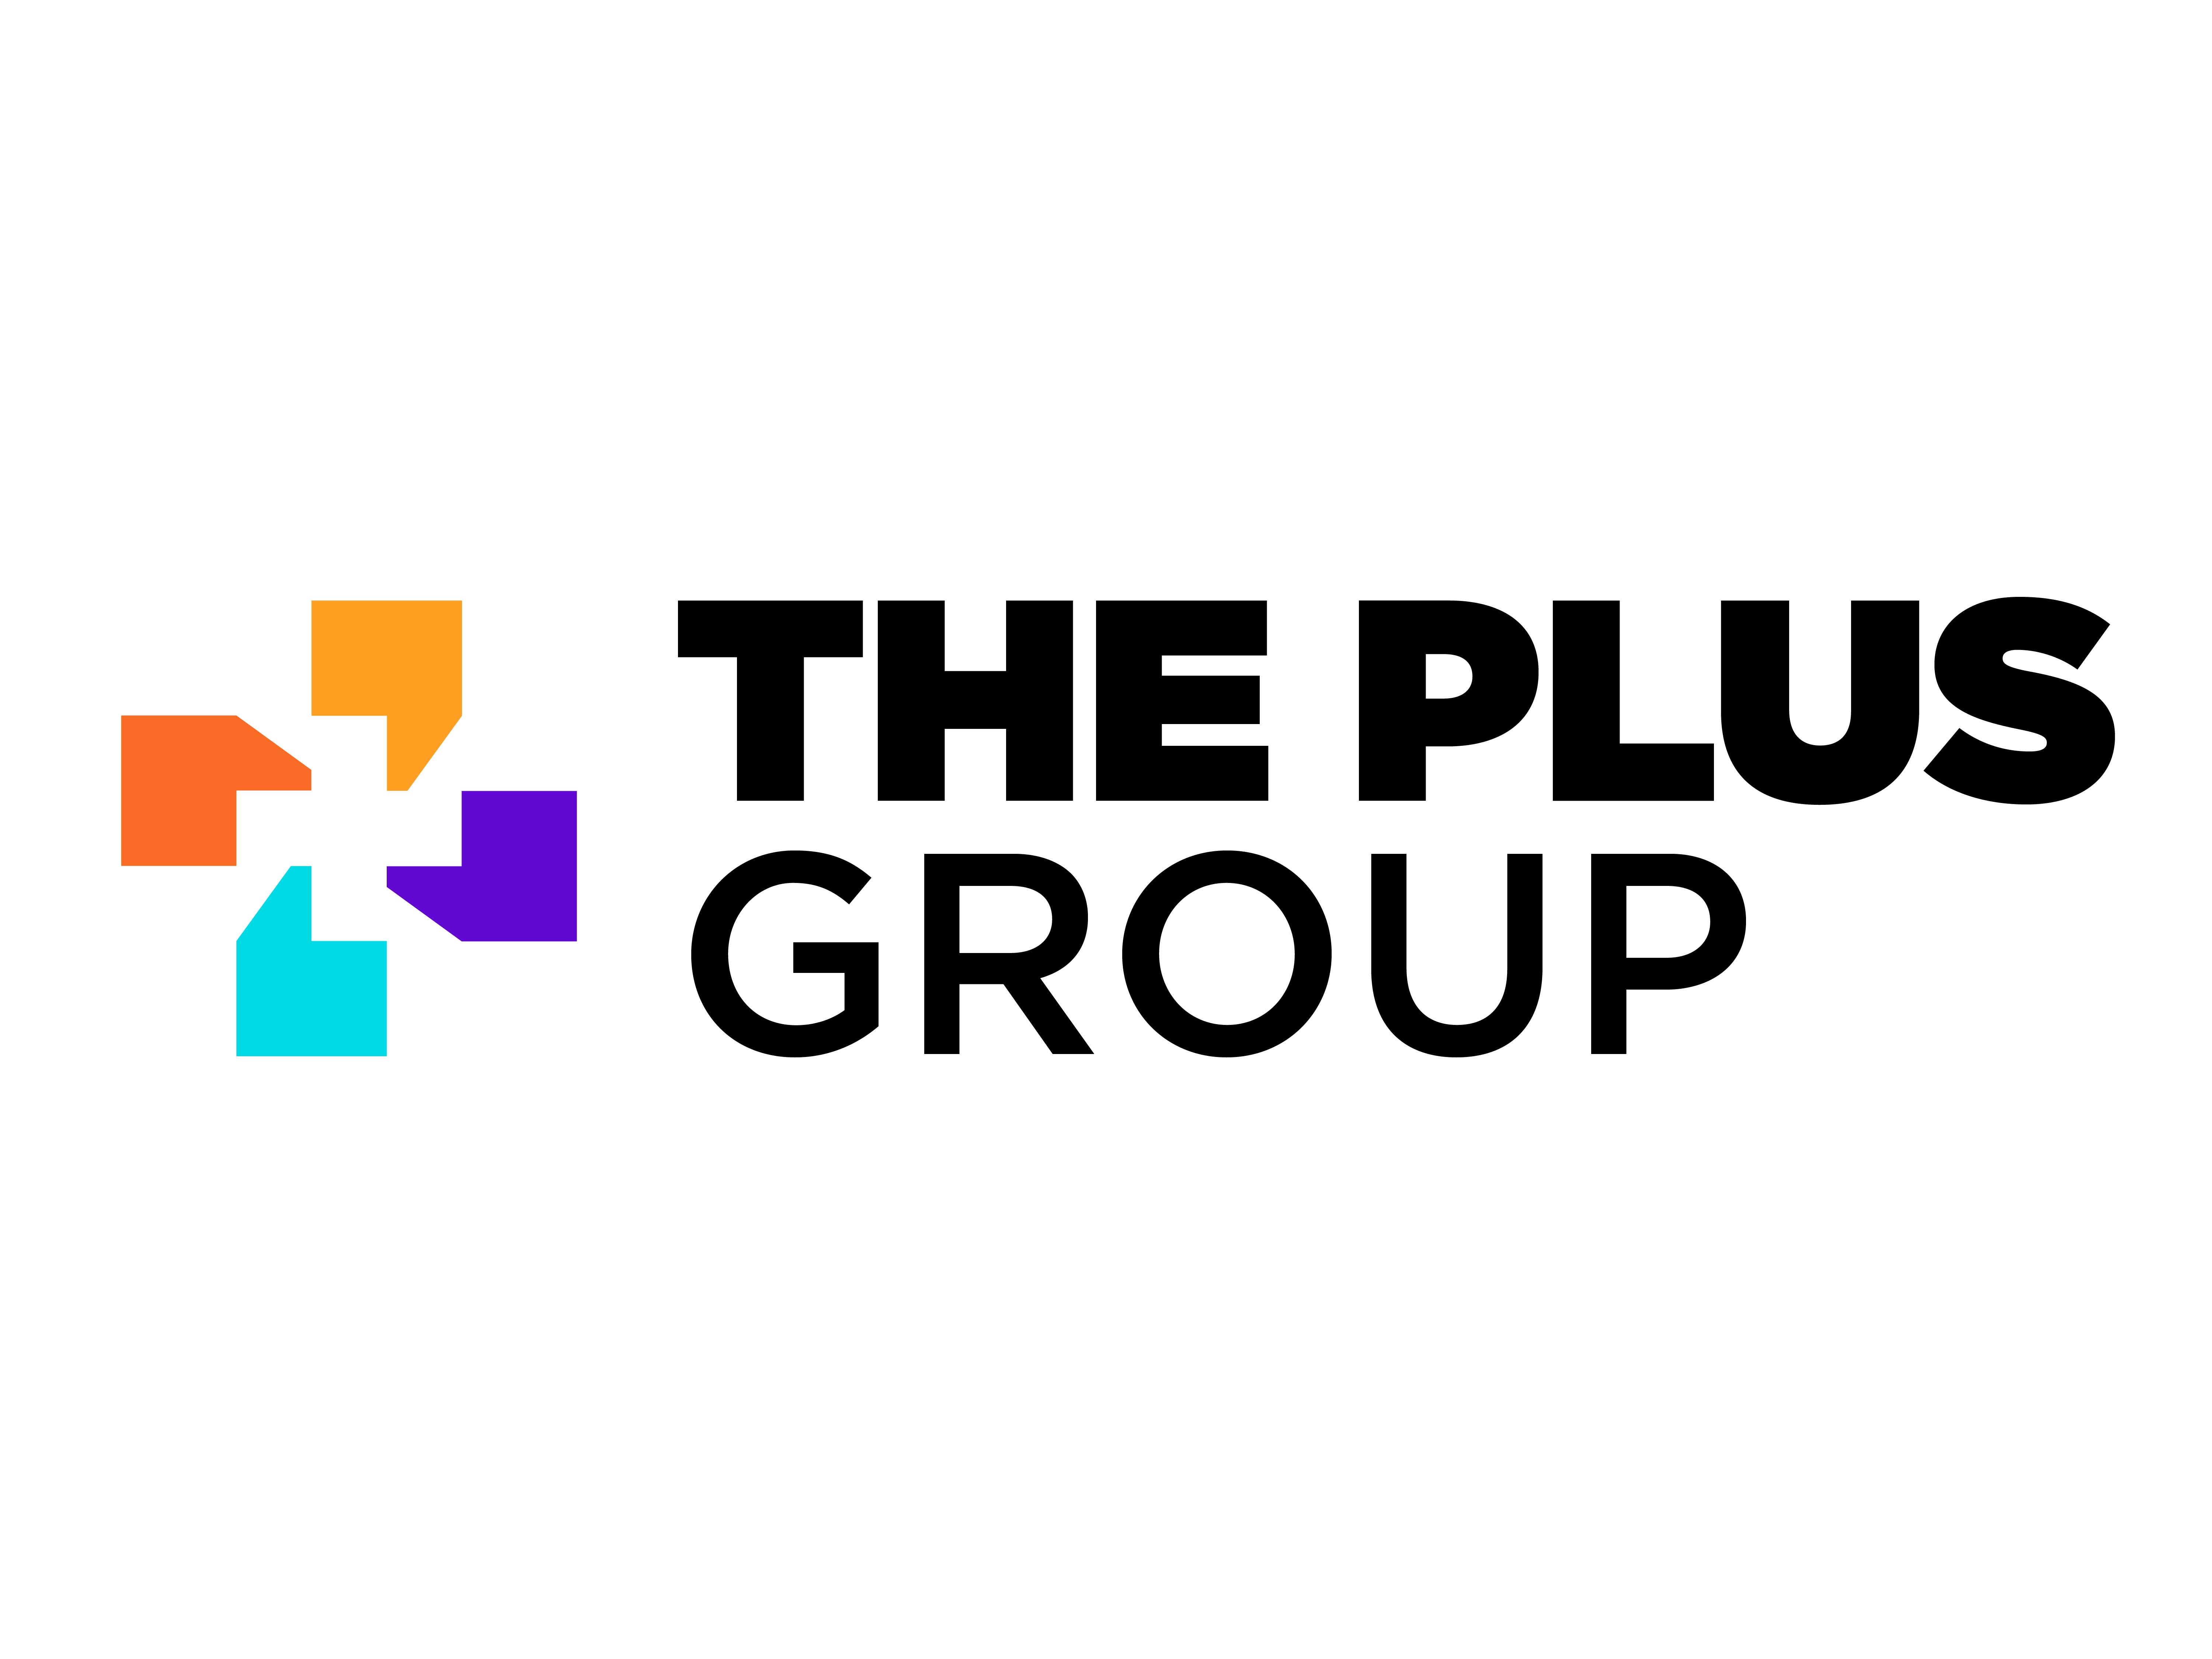 A new independent group of agencies is born with global footprint including Dubai and Riyadh